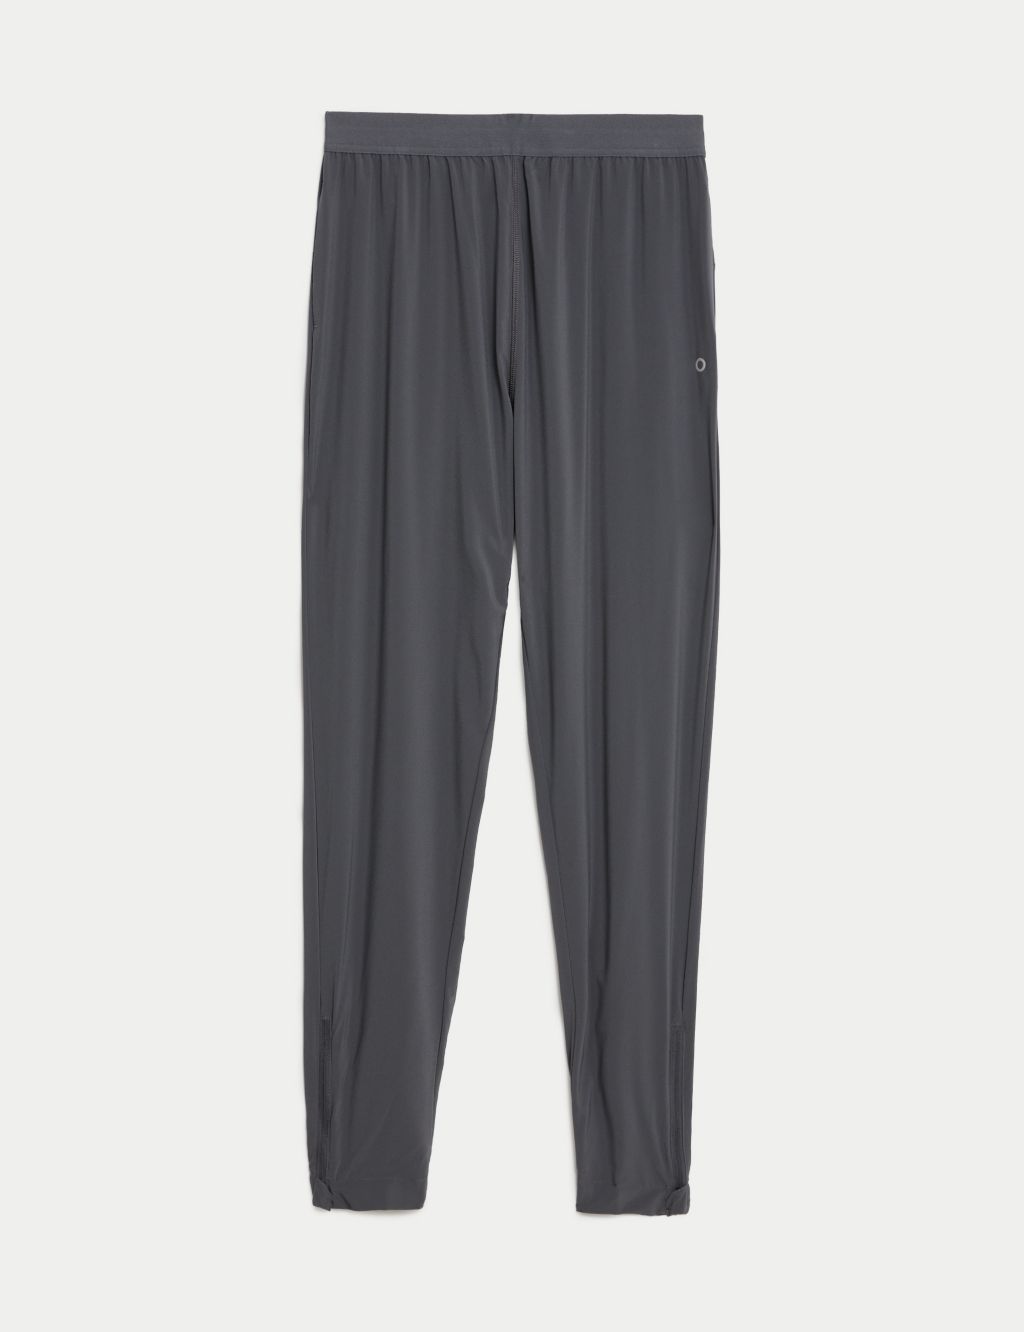 Woven High Waisted Tapered Track Pants image 2